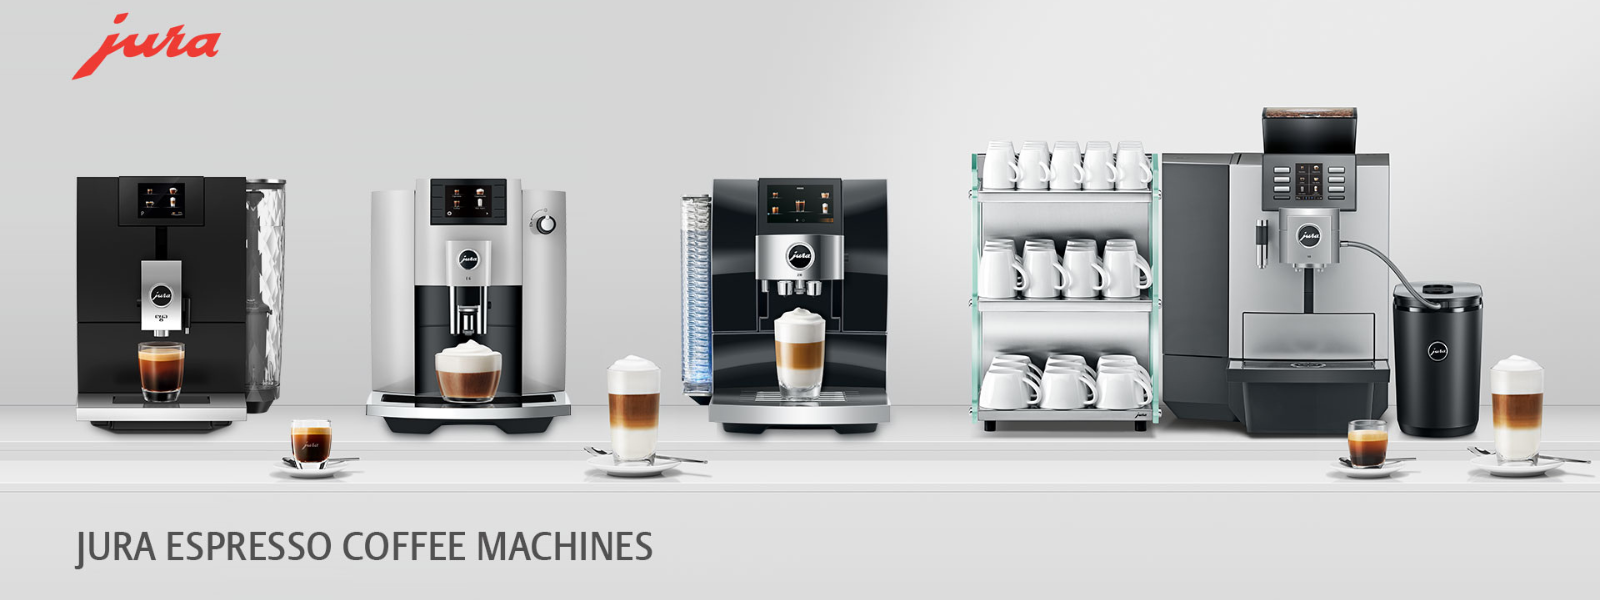 "Explore an exquisite collection of Jura coffee machines at Corporate Coffee – a banner showcasing a variety of popular models, each designed to elevate your coffee experience. From sleek, compact options to high-end espresso makers, discover the perfect blend of style and functionality in our curated selection."